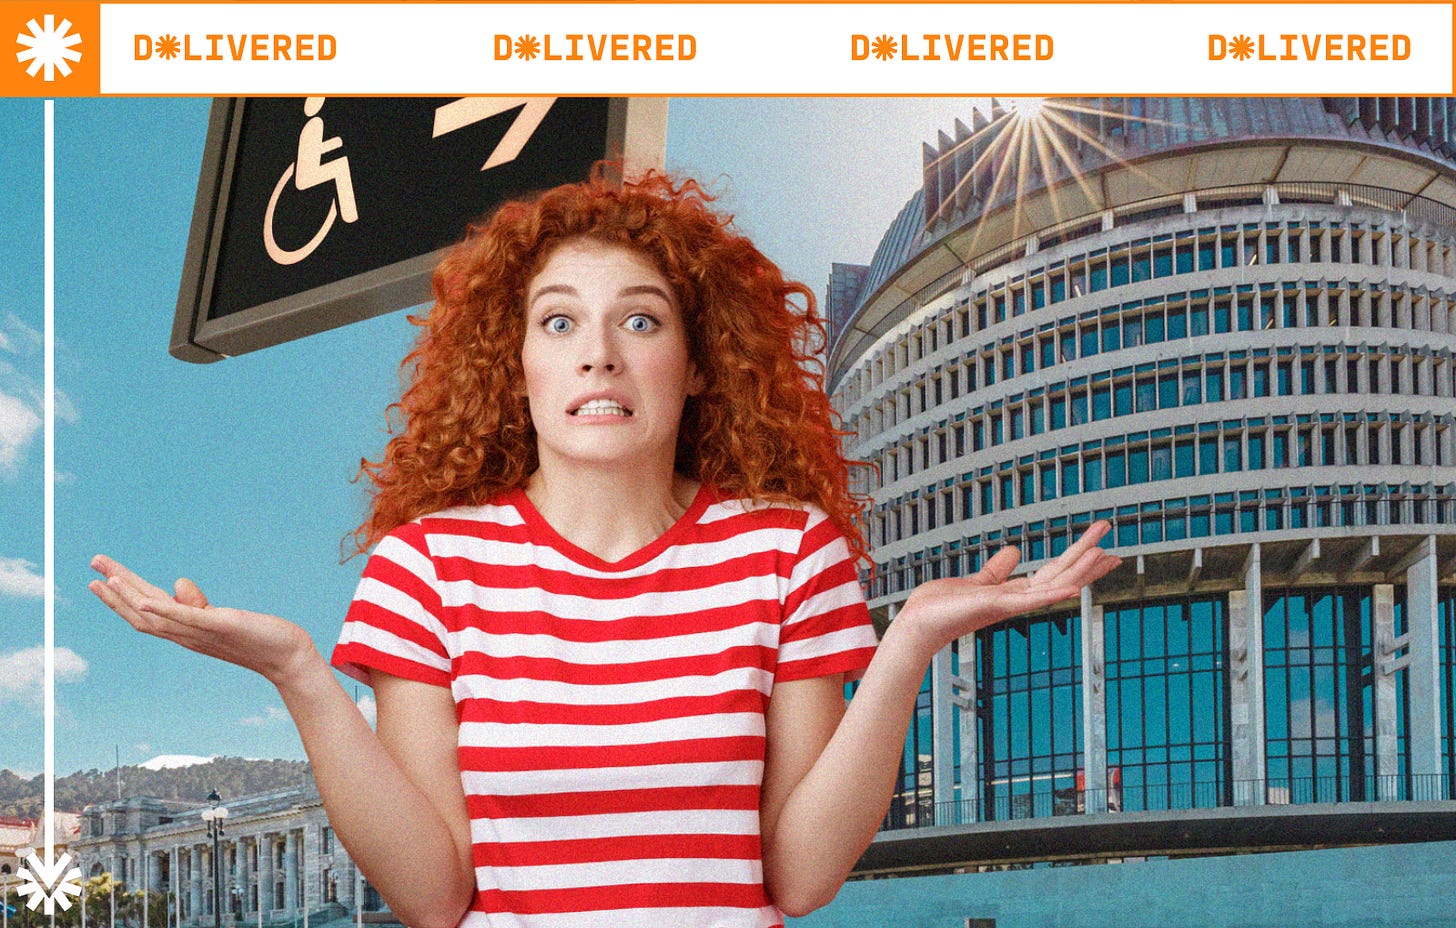 Image description  A woman with red curly hair wearing a red and white t-shirt shrugs and looks confused. In the background is a wheelchair sign and Aotearoa's Parliament building.